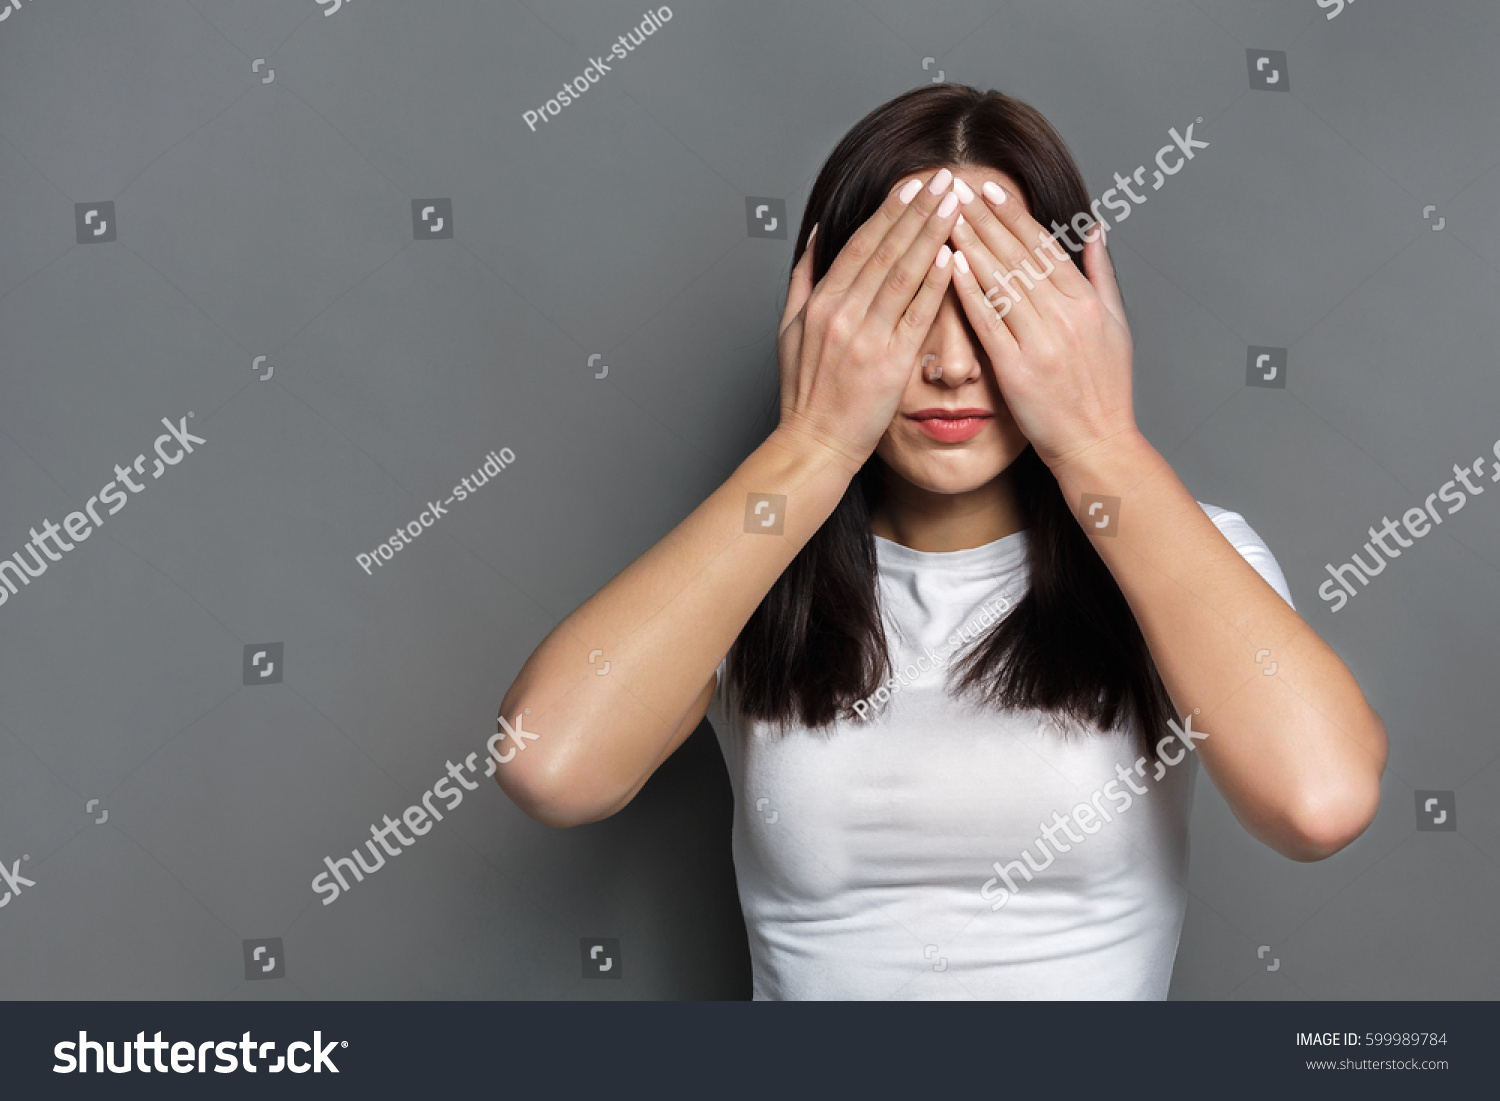 See No Evil Concept Portrait Young Stock Photo 599989784 | Shutterstock